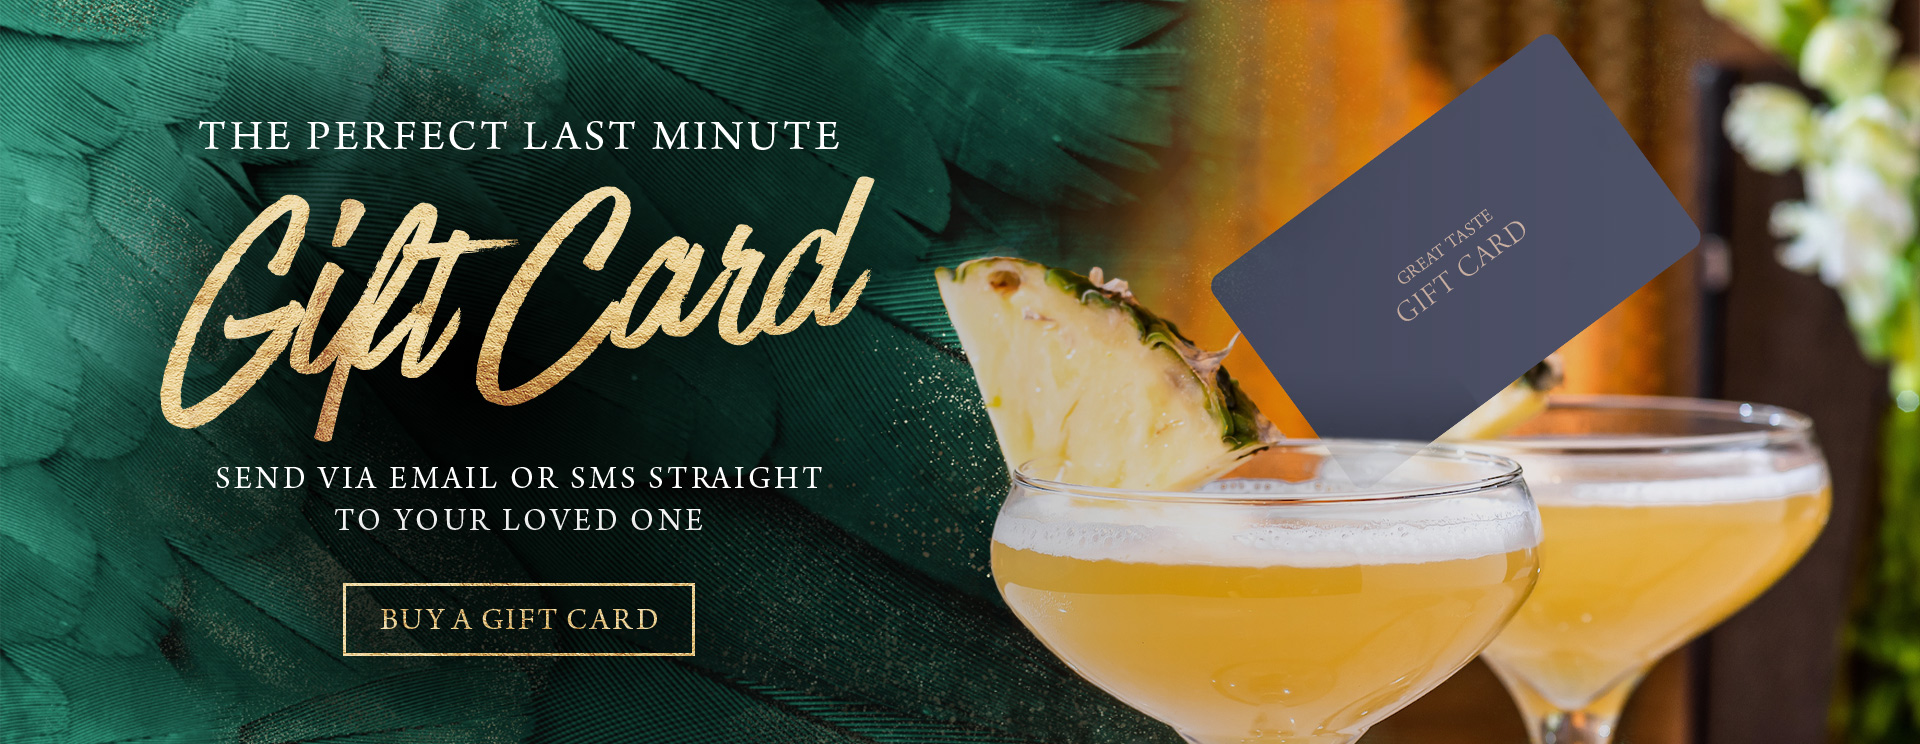 Give the gift of a gift card at The Botanist Bristol